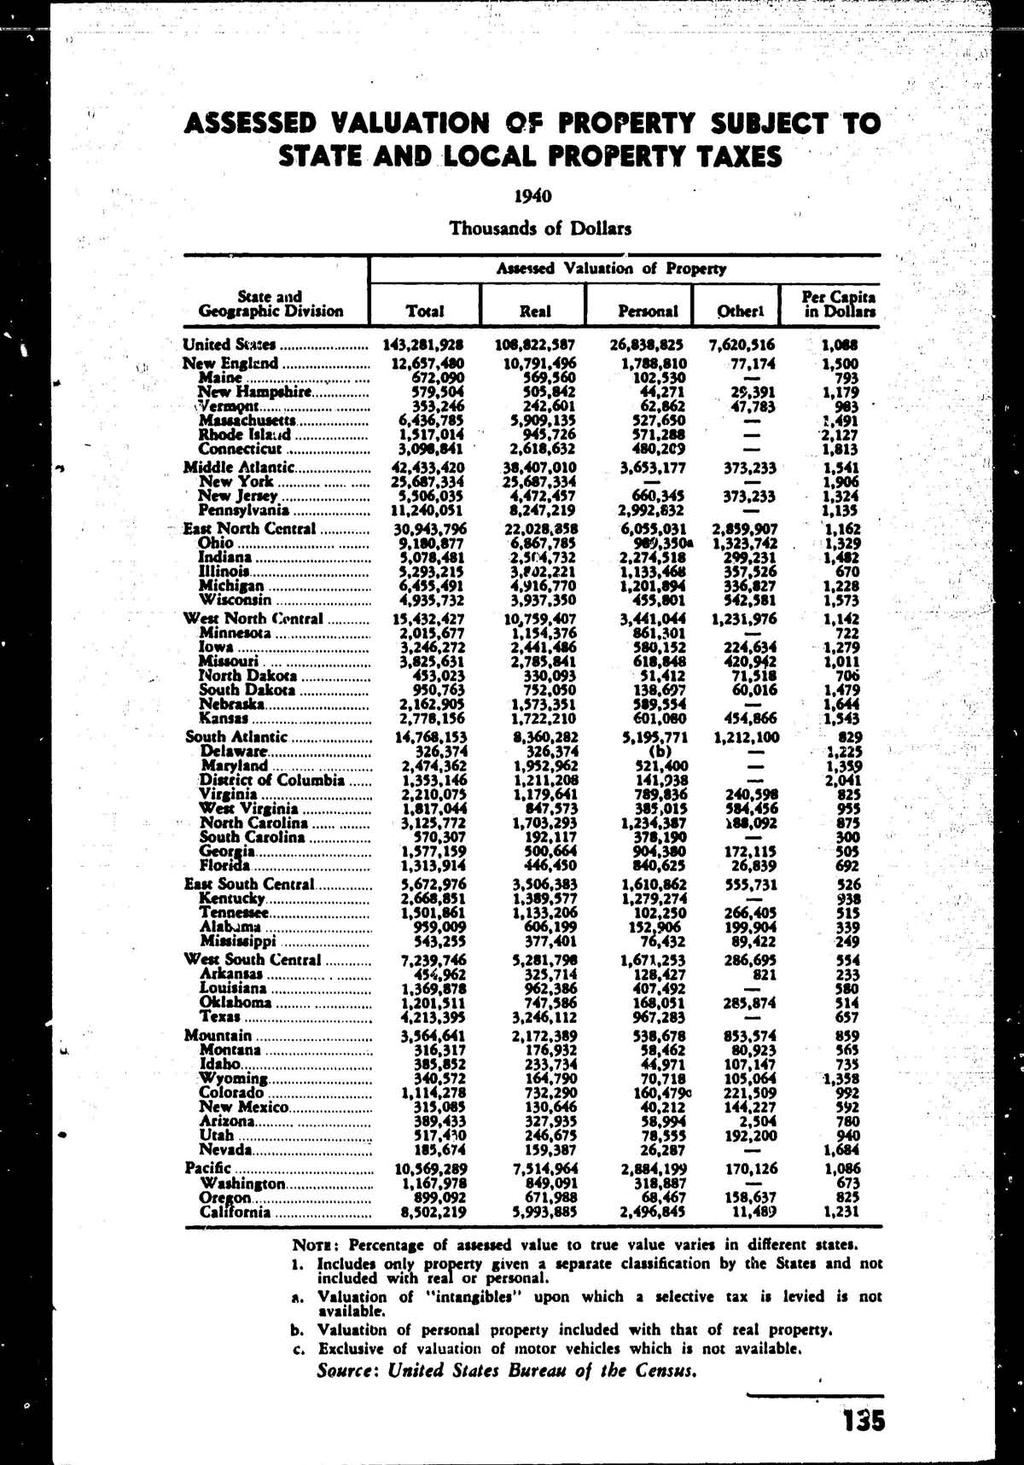 1940 Thousands of Dollars h u State and Geographic Division Taal Assessed Valuation of Propert y Real Personal Otherl Per Capita in Dollars United Stmes 143,281,928 108,622,587 26,838,825 7,620,516 1.